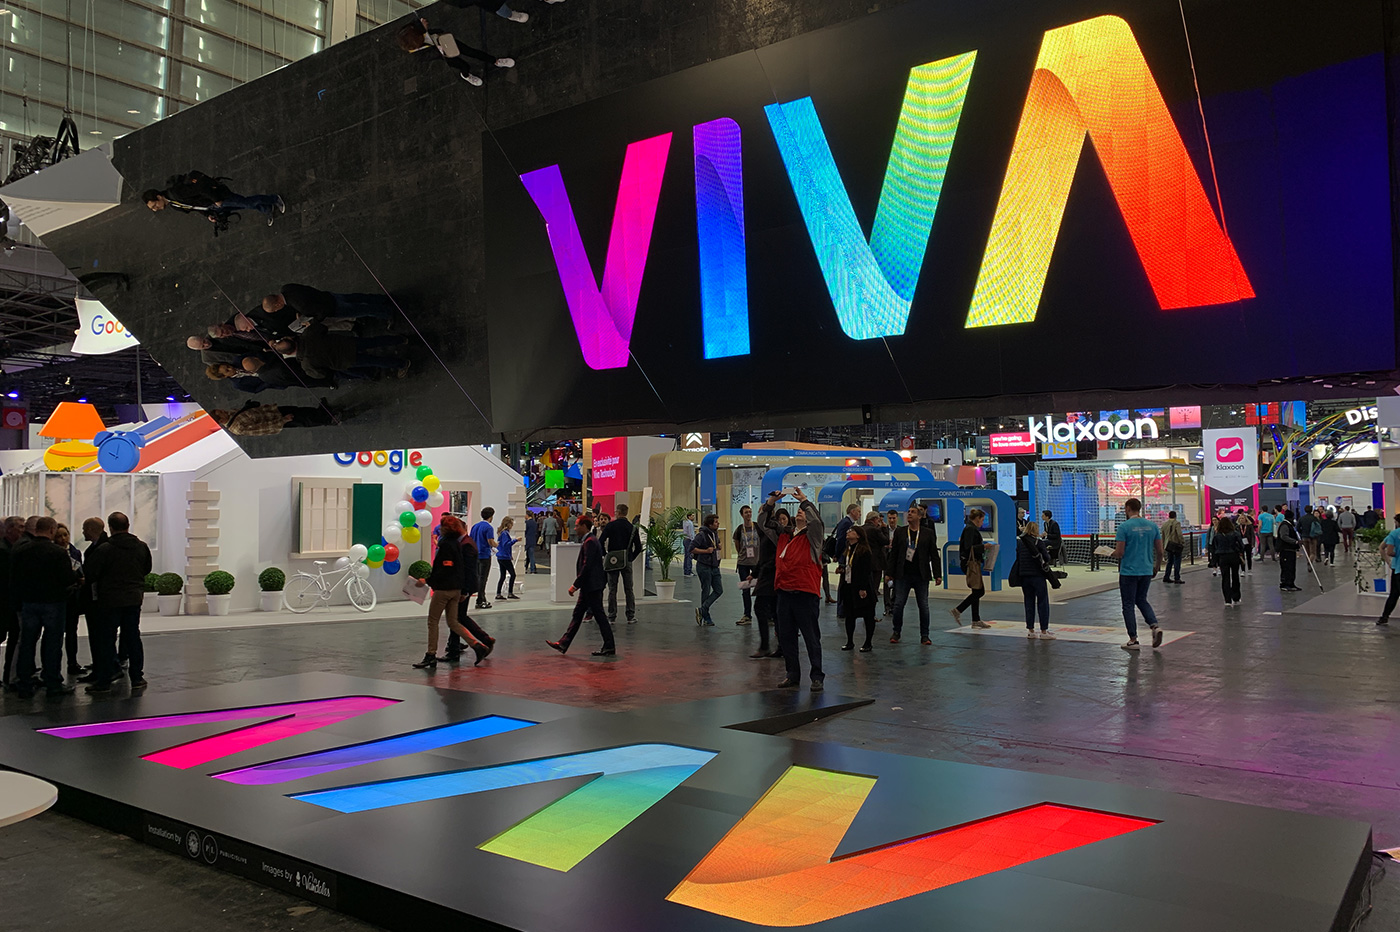 Togg will present at the ViVaTech event